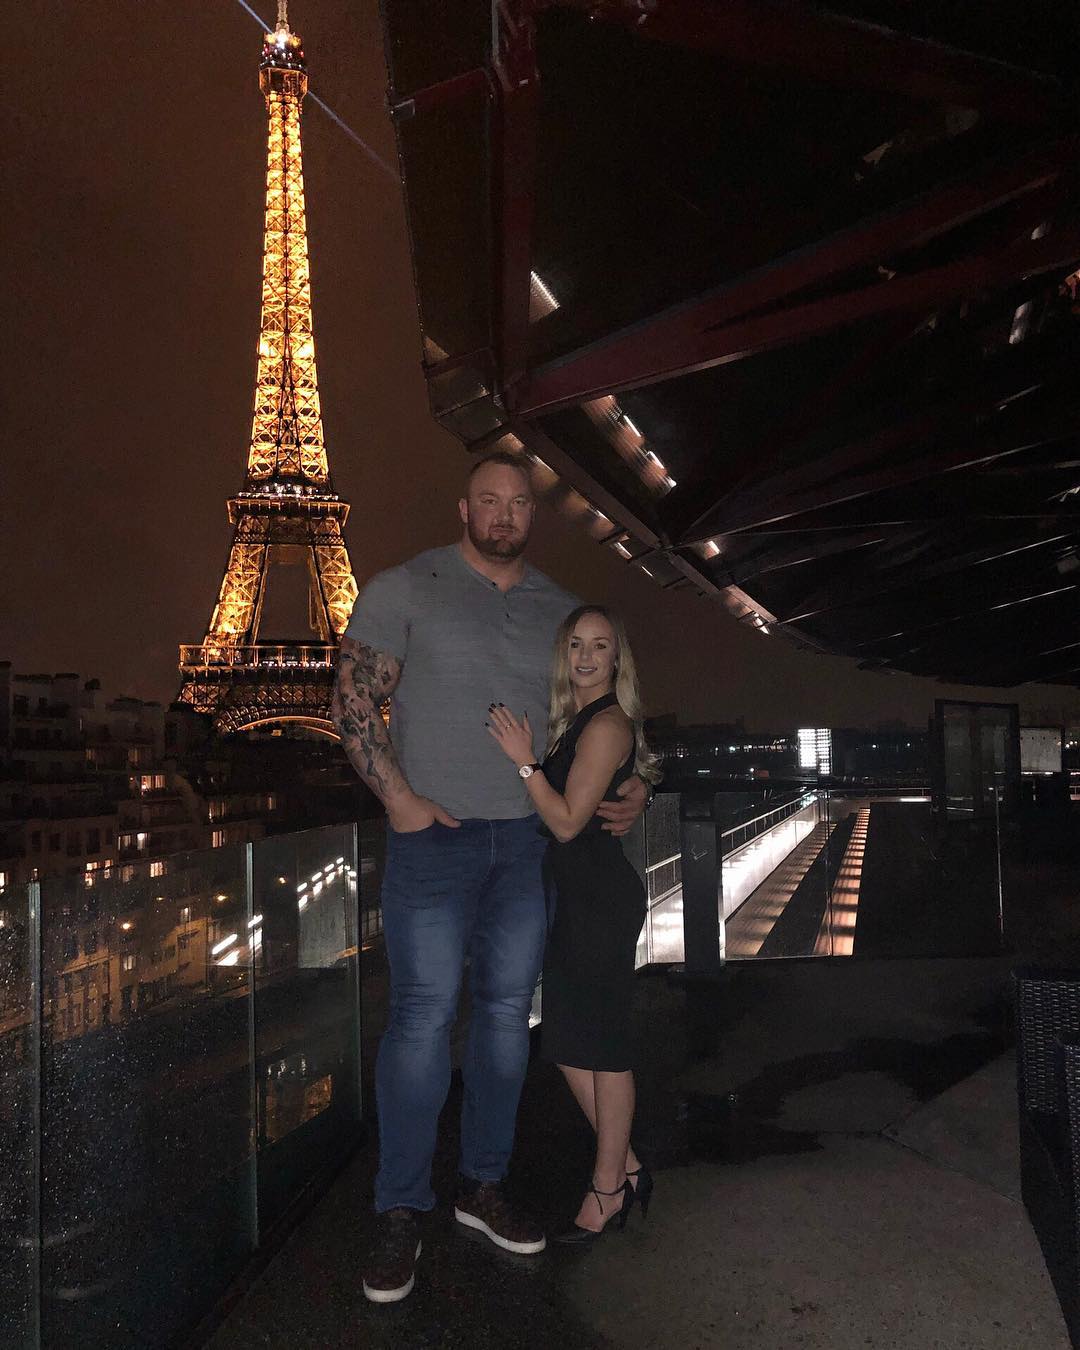 pictures of the mountain from got and his tiny girlfriend are storming the internet